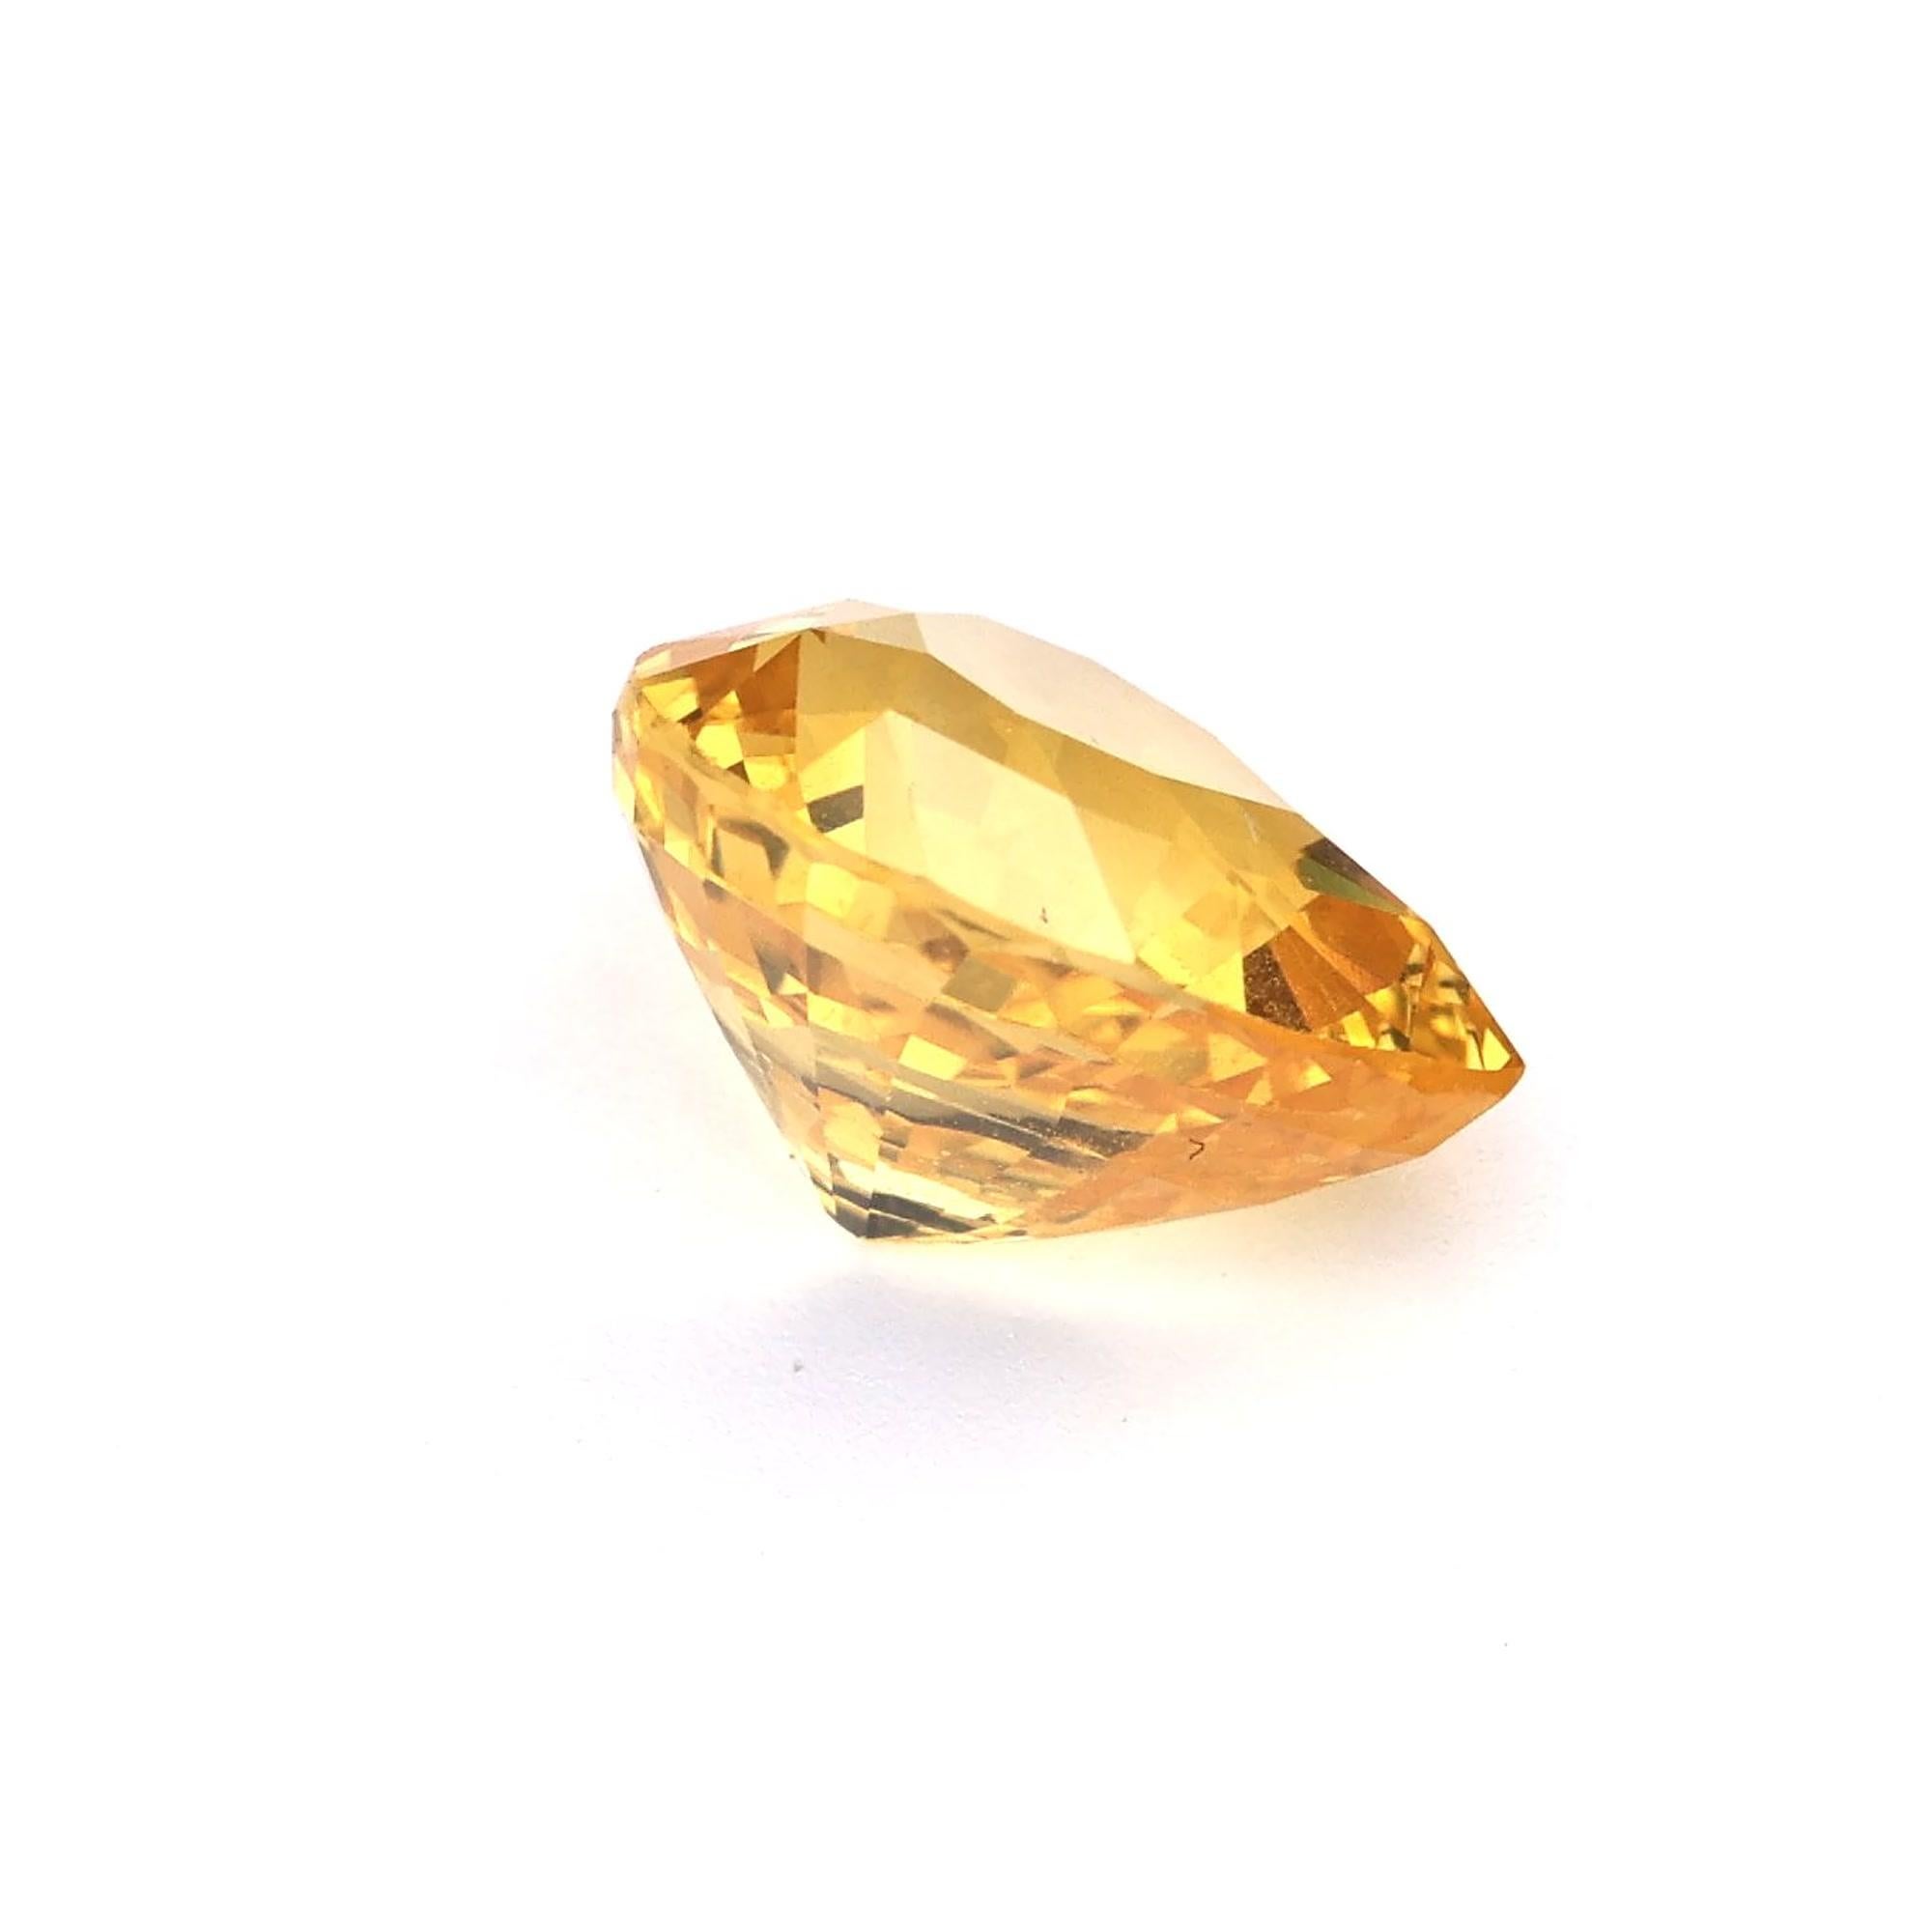 Certified 4.45 ct Natural Yellow Sapphire Pear Shape Ceylon Origin Ring Stone For Sale 1